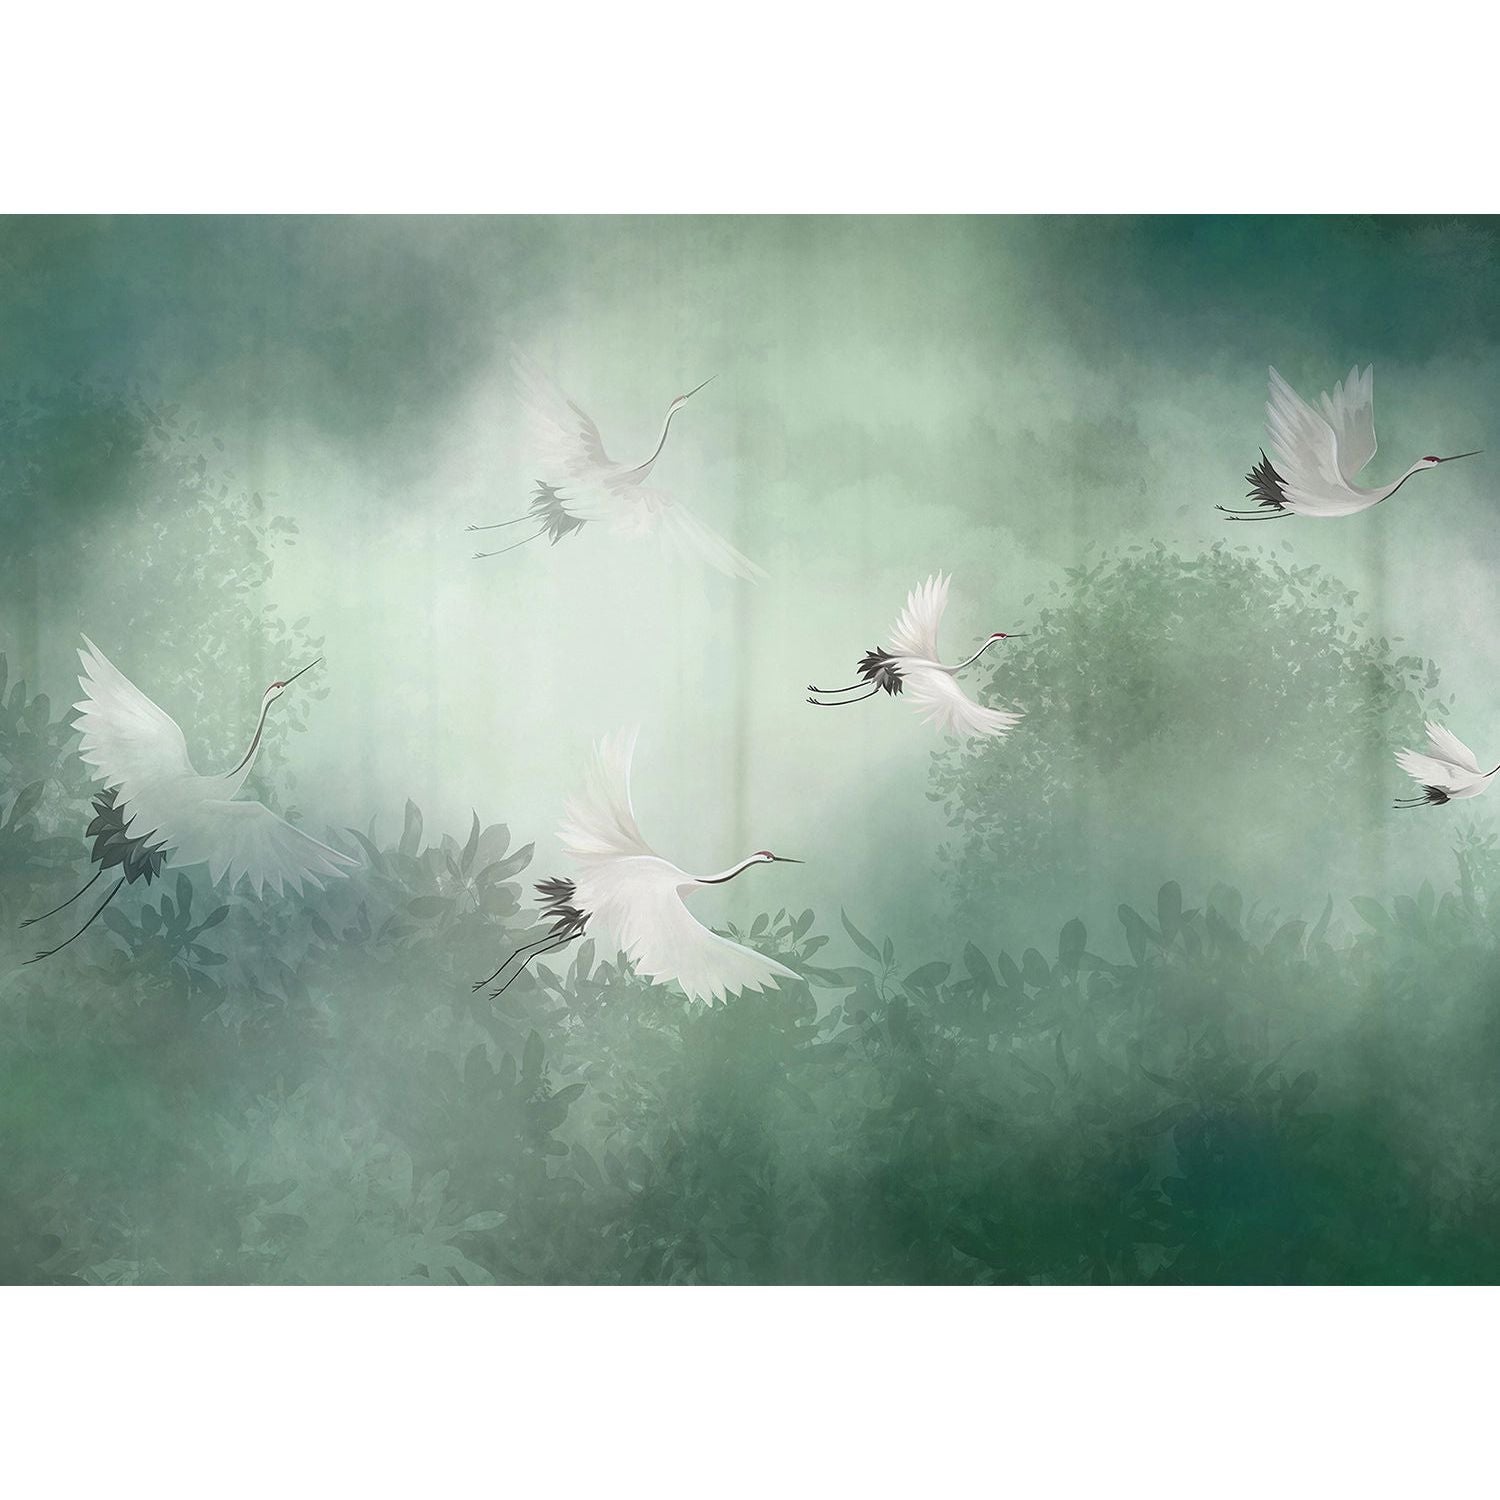 Serene Skyline: Green Atmosphere Wall Mural with Leafs and Flying Birds